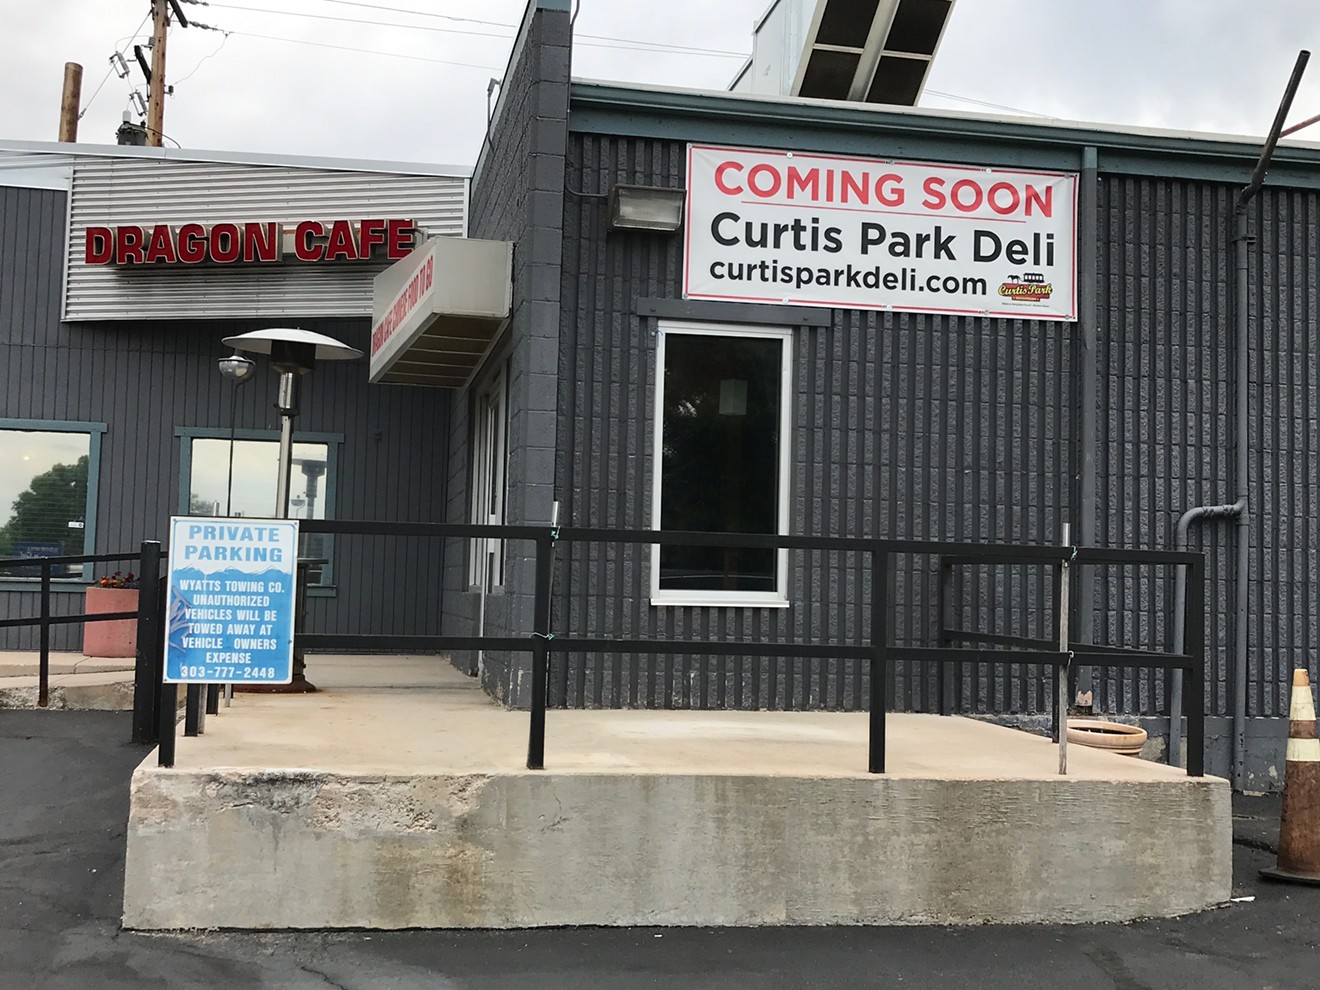 Curtis Park Deli's new location on East Sixth Avenue.